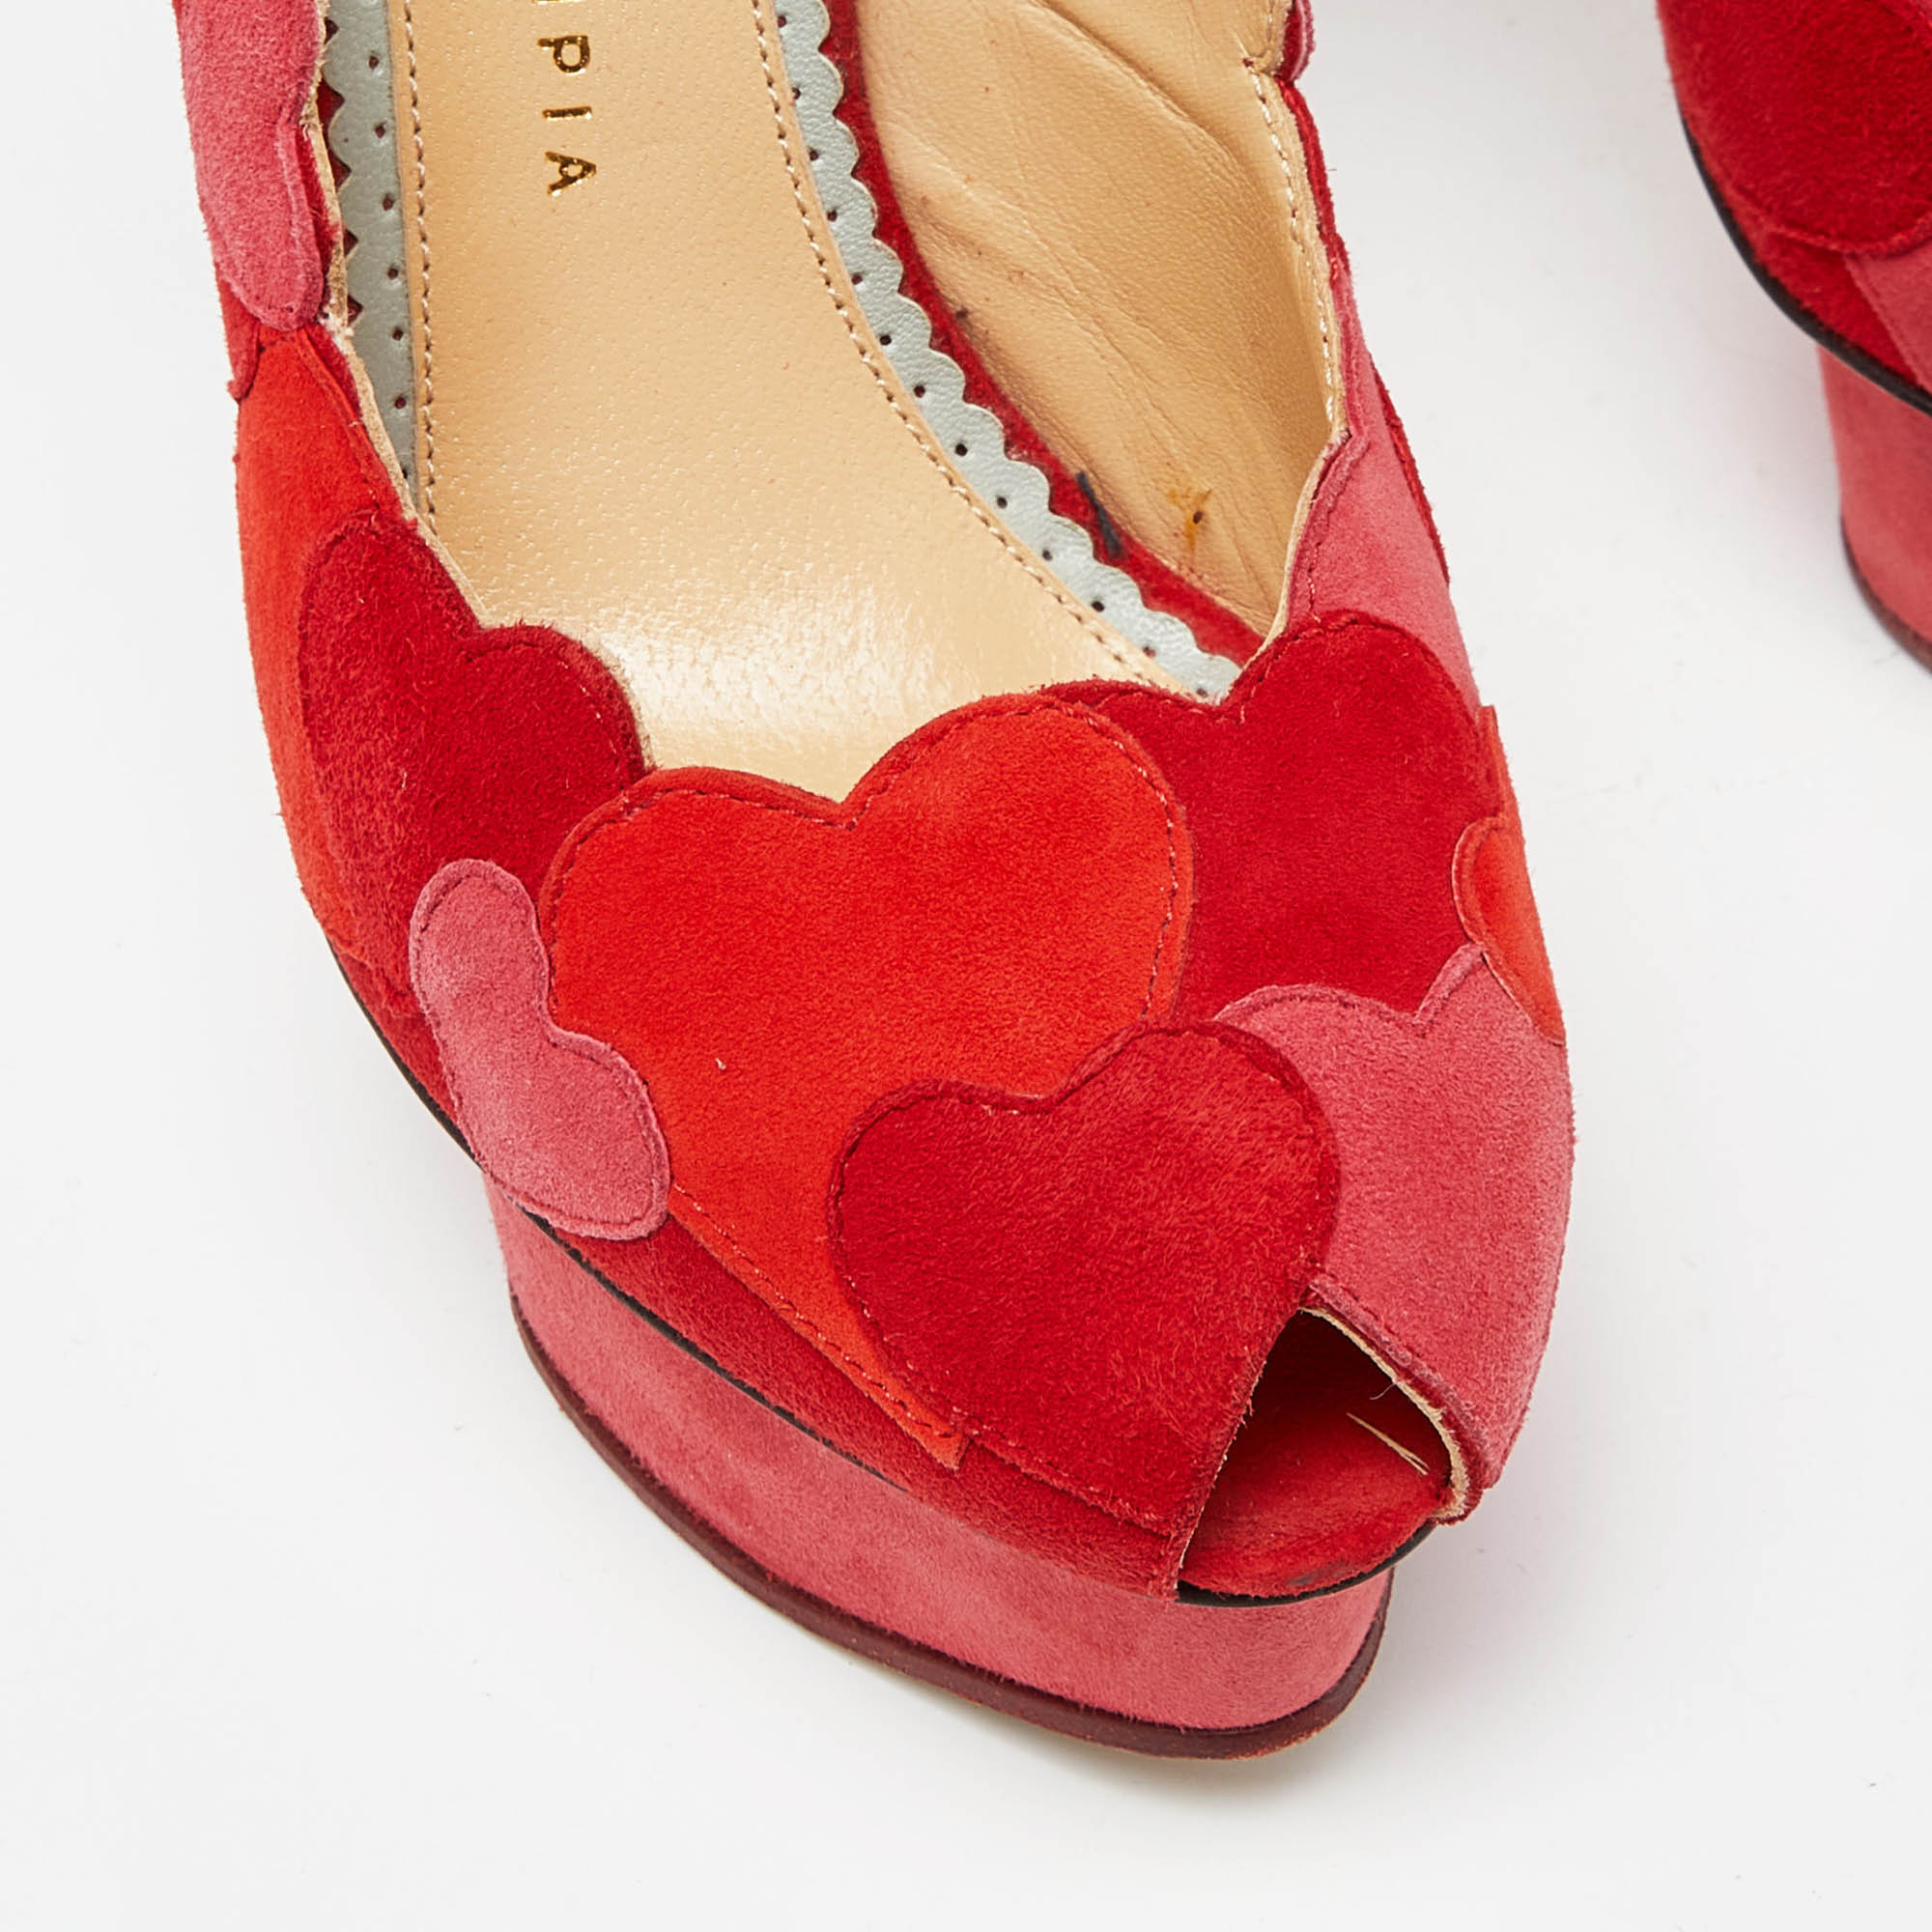 Charlotte Olympia Red/Pink Suede Love Me Heart Appliqued Dolly Pumps Size 36.5